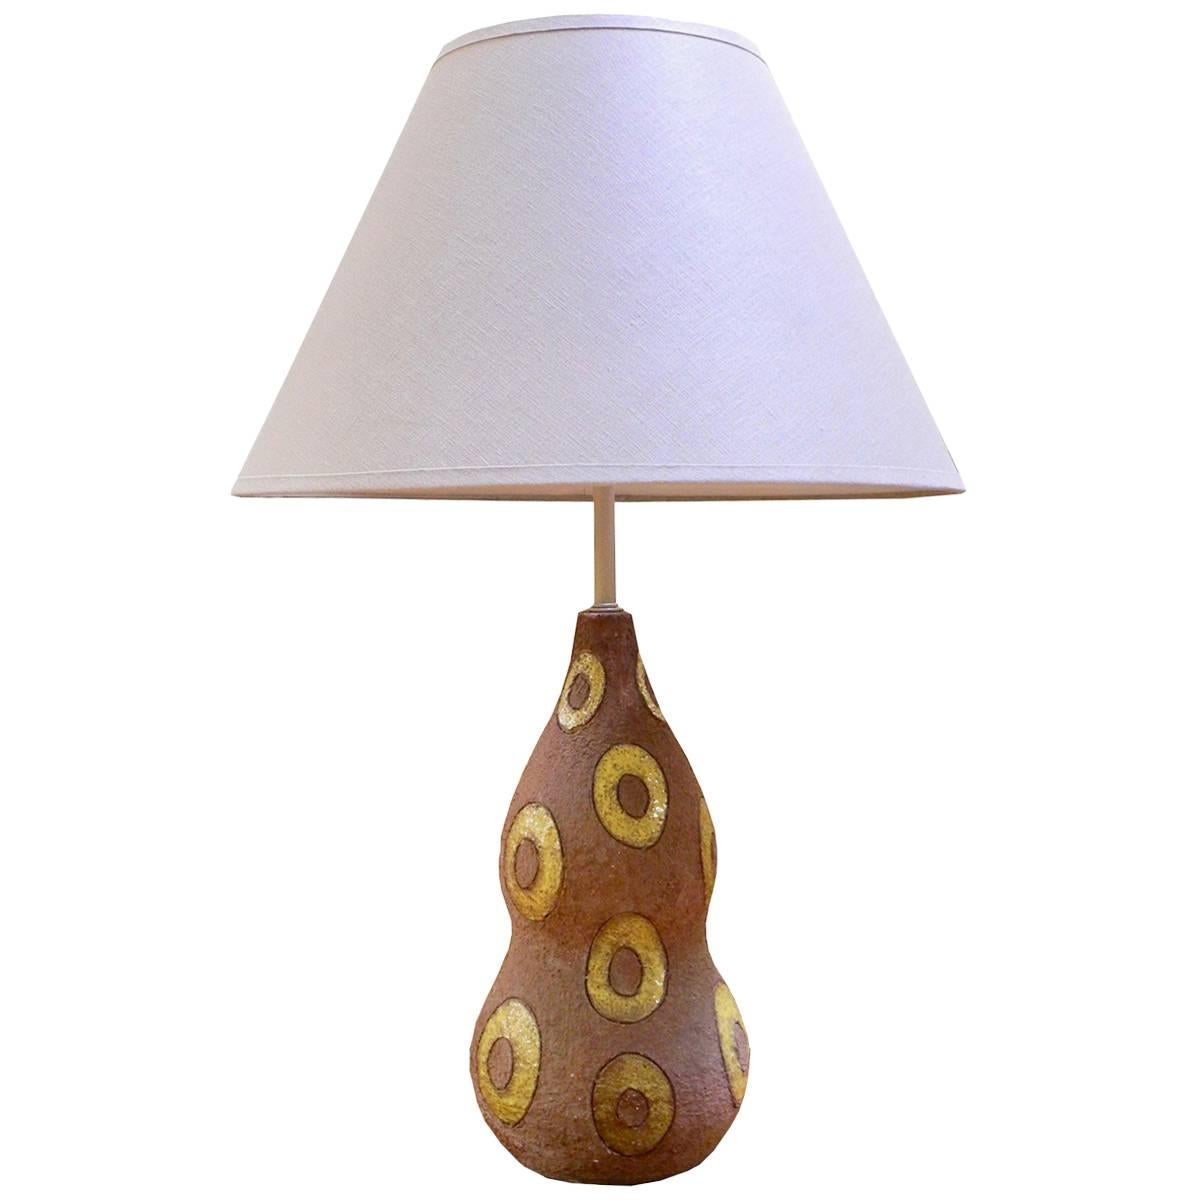 Mid-Century Modern Italian Textured Ceramic Lamp by Ugo Zaccagnini, 1950s For Sale